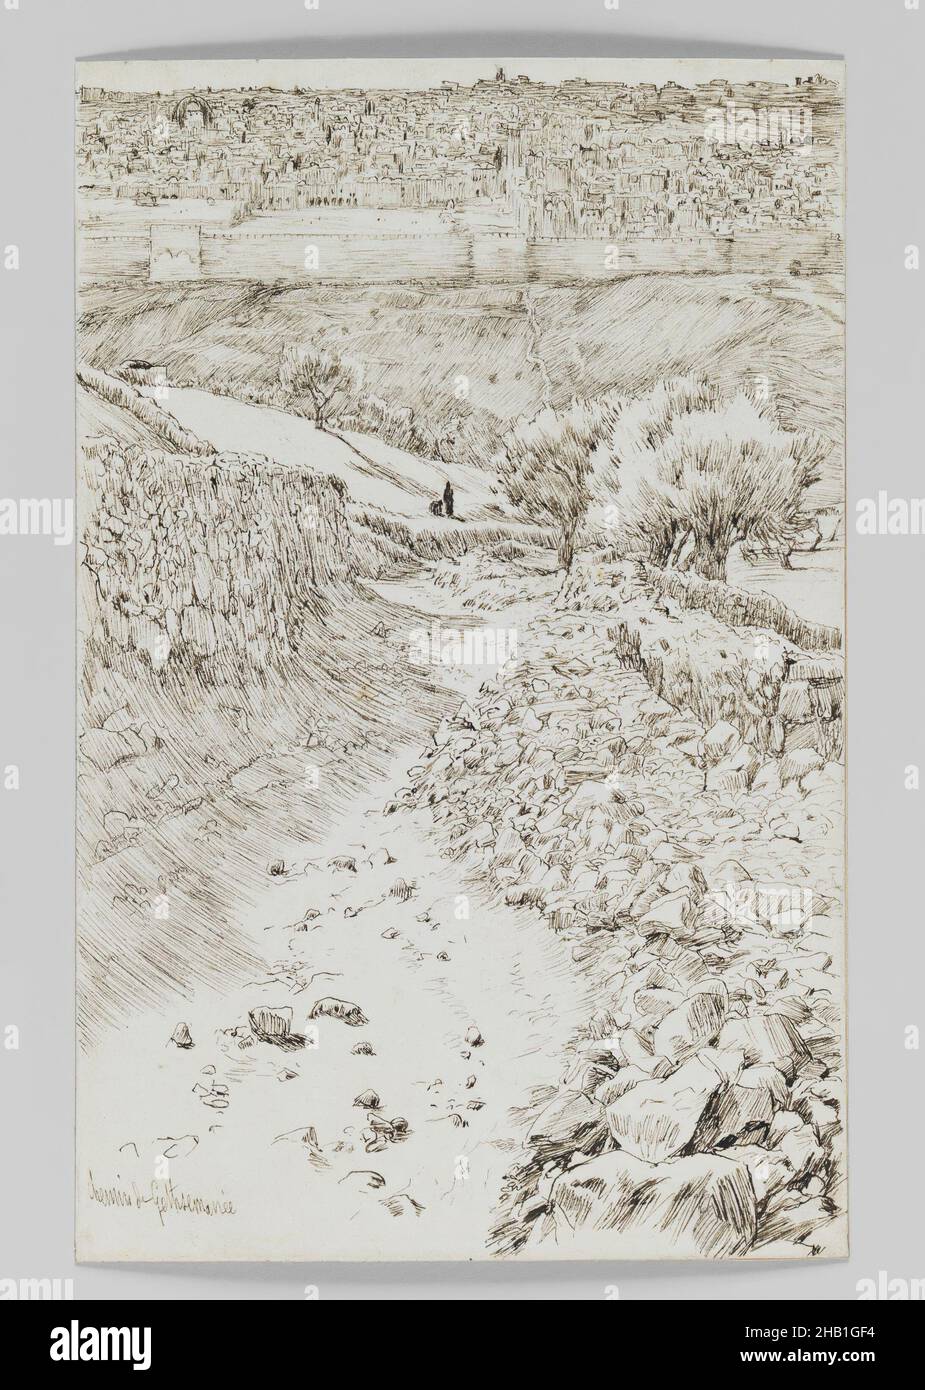 Road Leading from Gethsemane to the Mount of the Ascension, Chemin allant de Getsemani au mont de l'Ascension, The Life of Our Lord Jesus Christ, La Vie de Notre-Seigneur Jésus-Christ, James Tissot, French, 1836-1902, Pen and ink, 1886-1887 or 1889, Sheet: 7 1/4 x 4 11/16 in., 18.4 x 11.9 cm, black and white, drawing, IMLS, journey, landscape, path, rock, rocky road, stencil, Tissot, travel Stock Photo